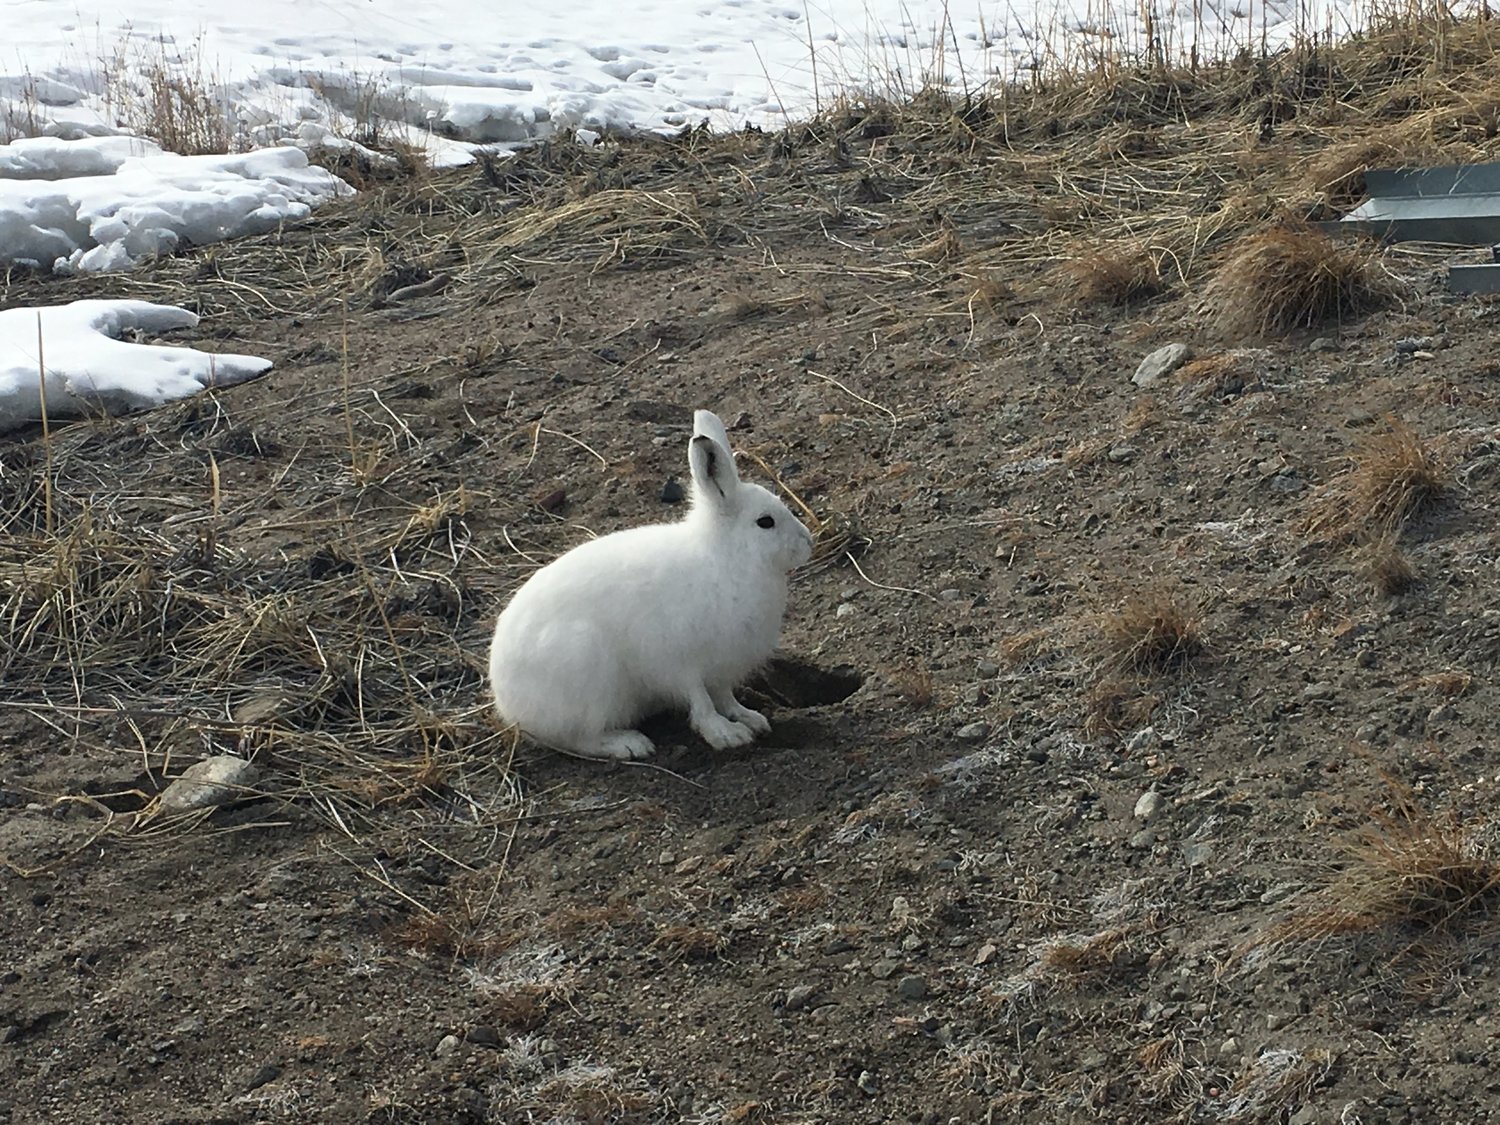 Arctic Hare: I had crawl about 20 feet and take 30 photos to get this one good image!